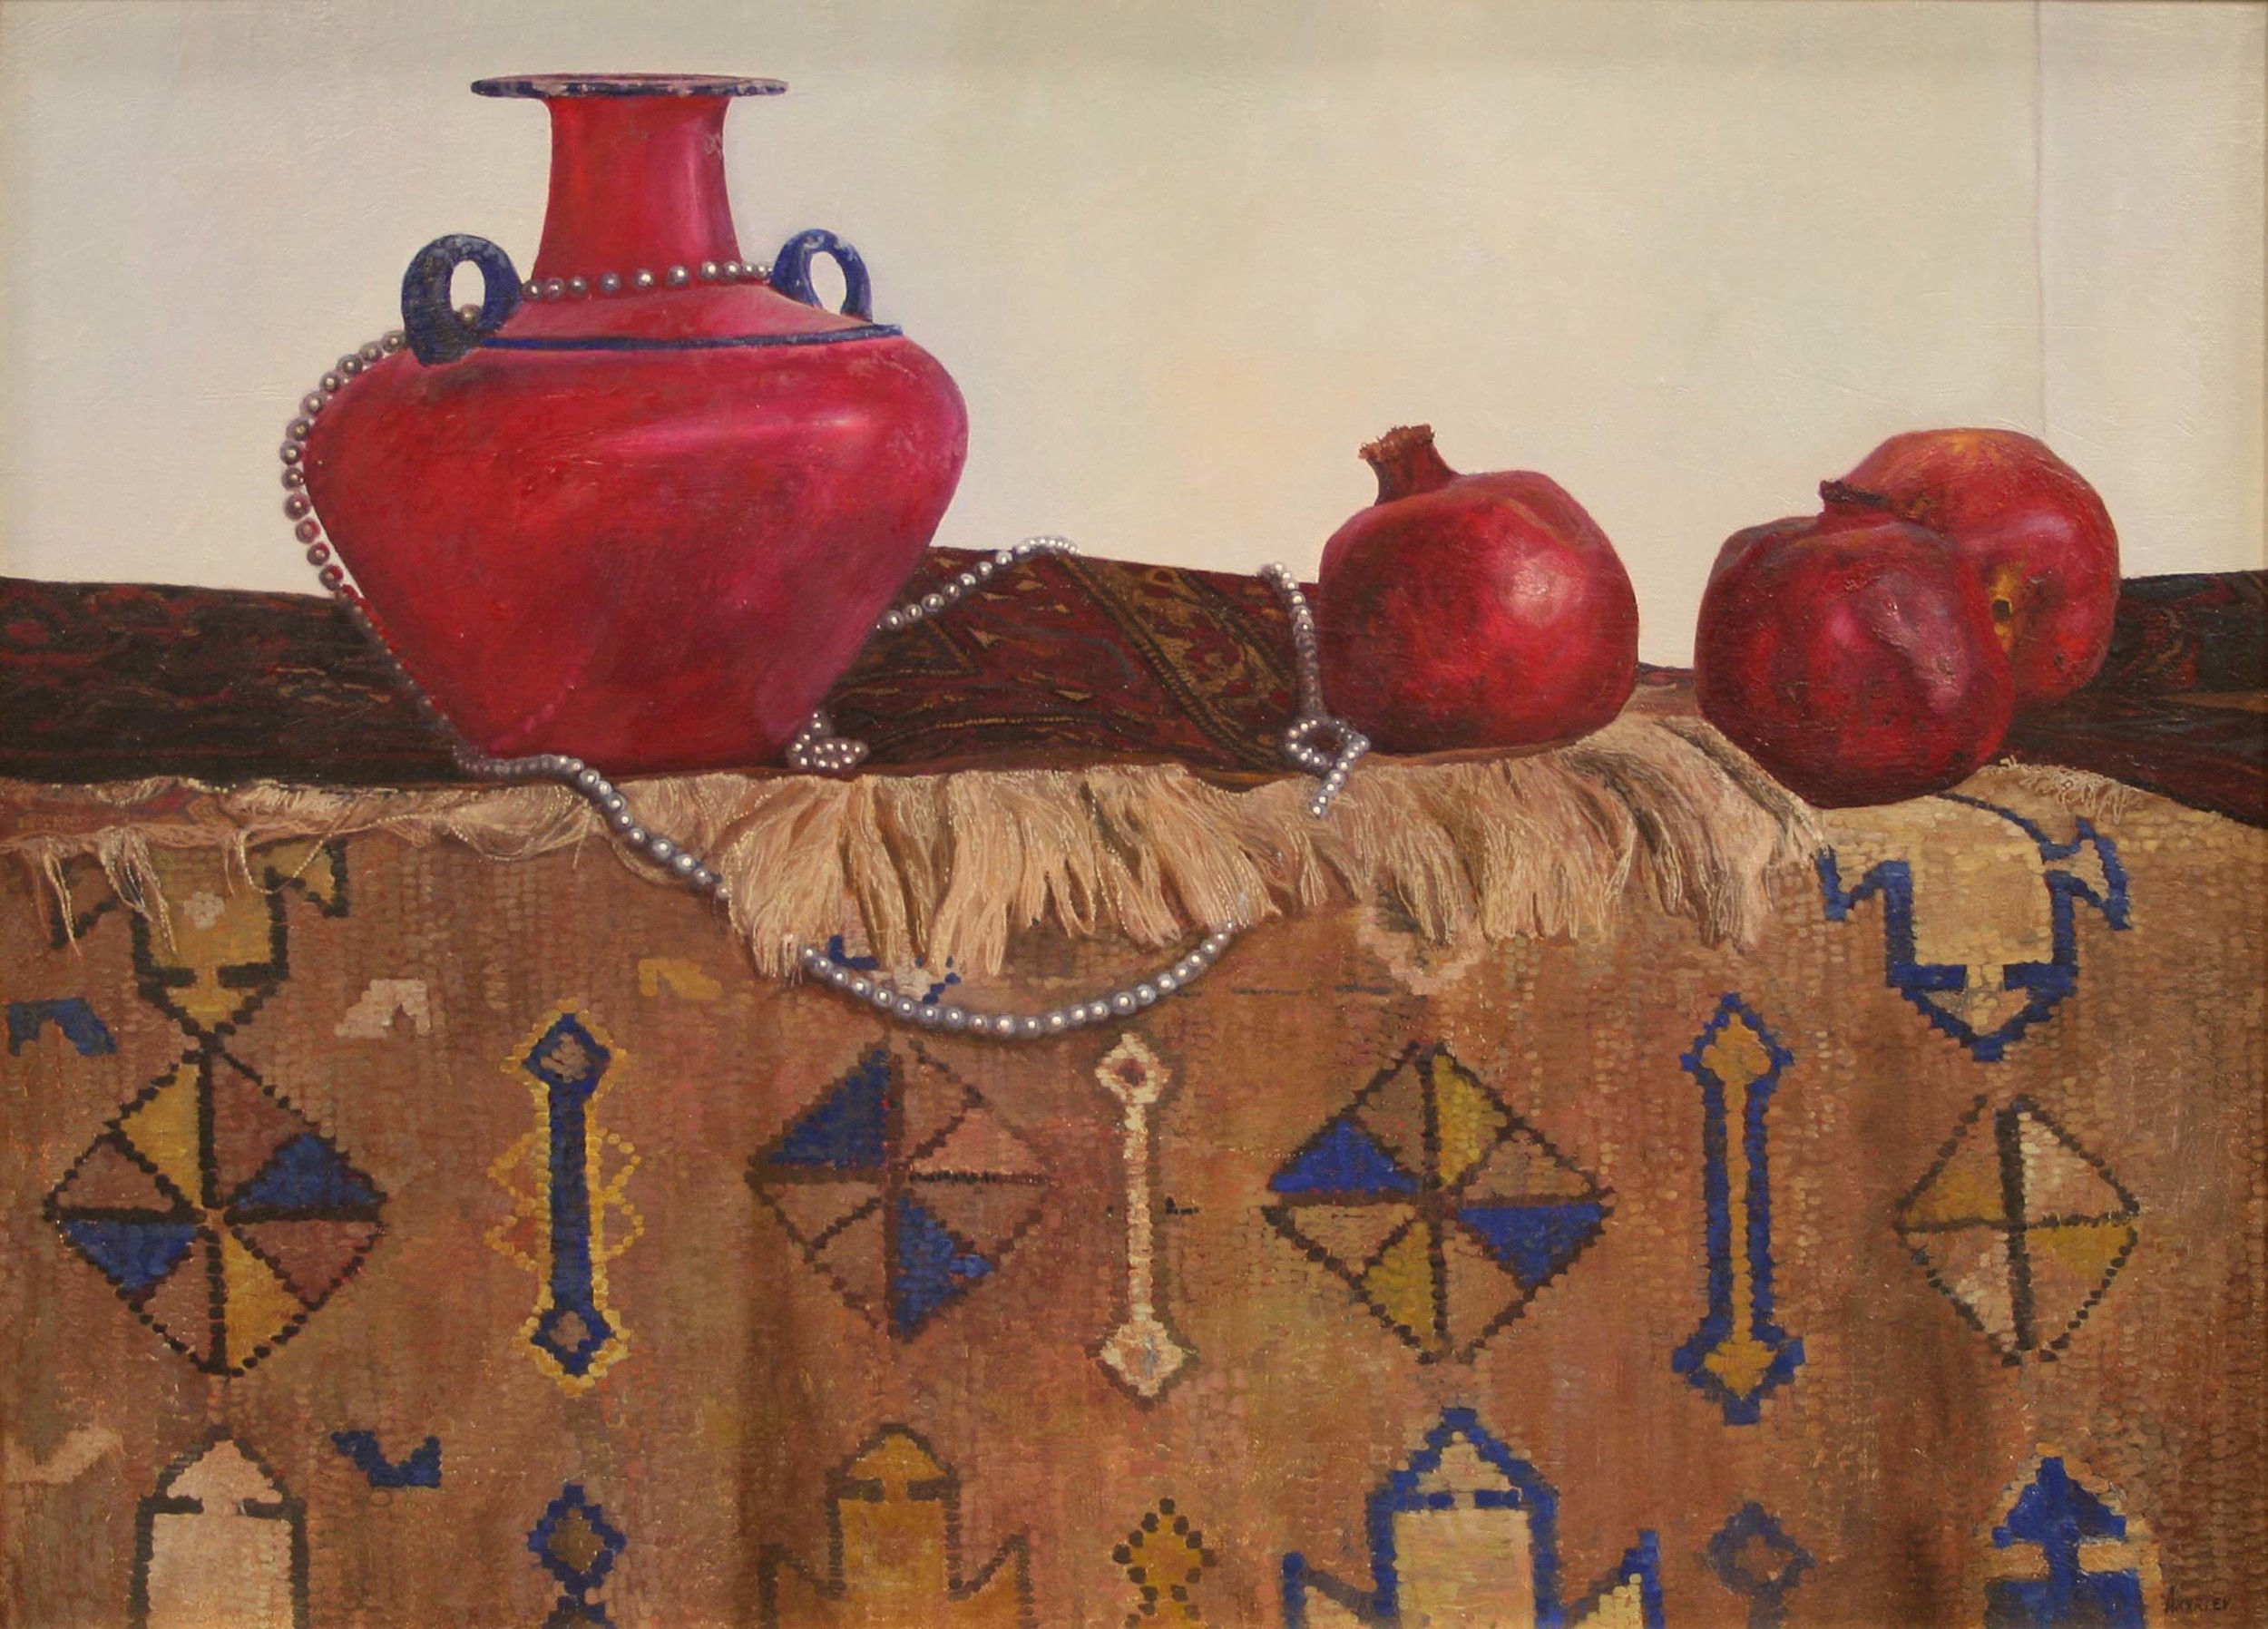 Two rugs with a red pot and pomegranates on it.